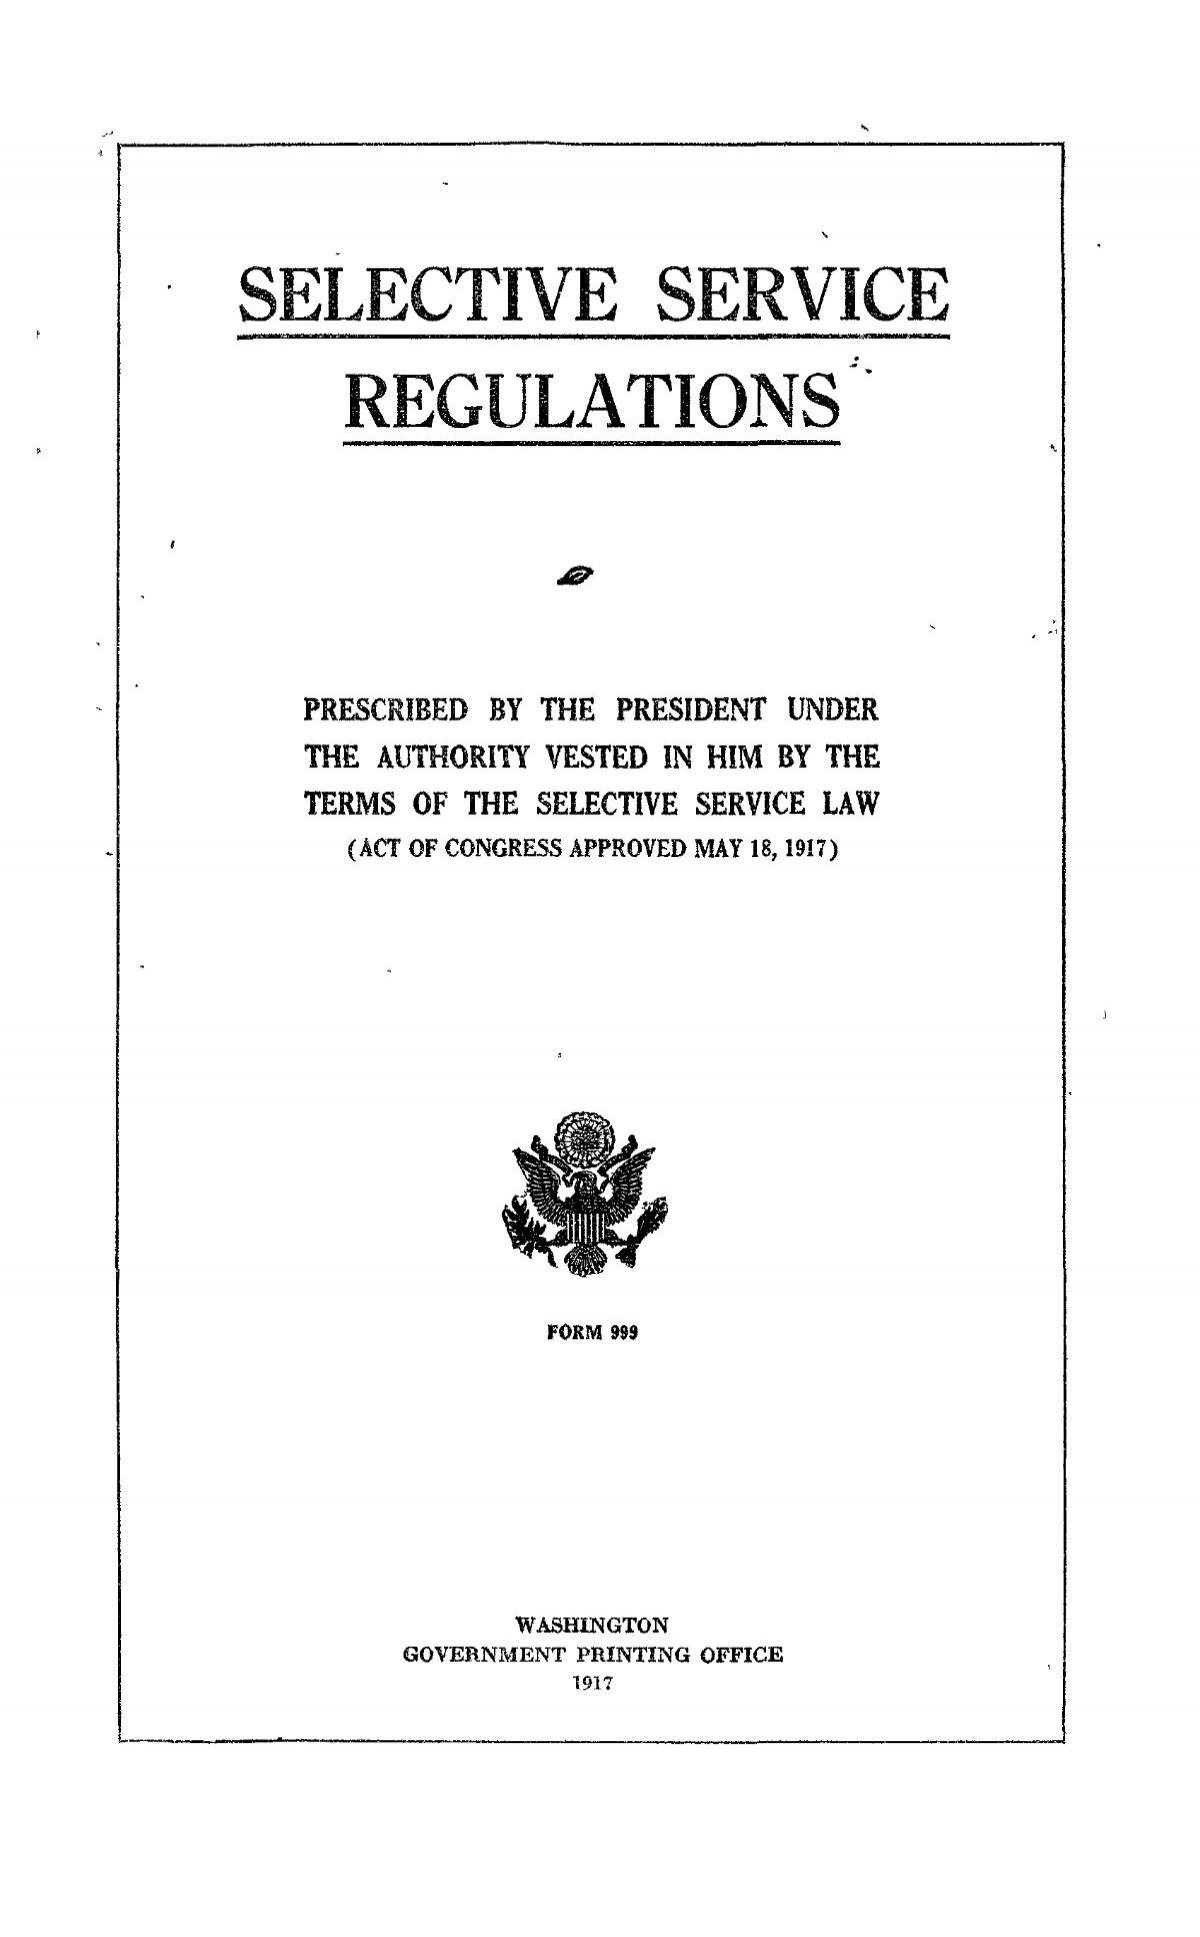 Selective service regulations prescribed by the President